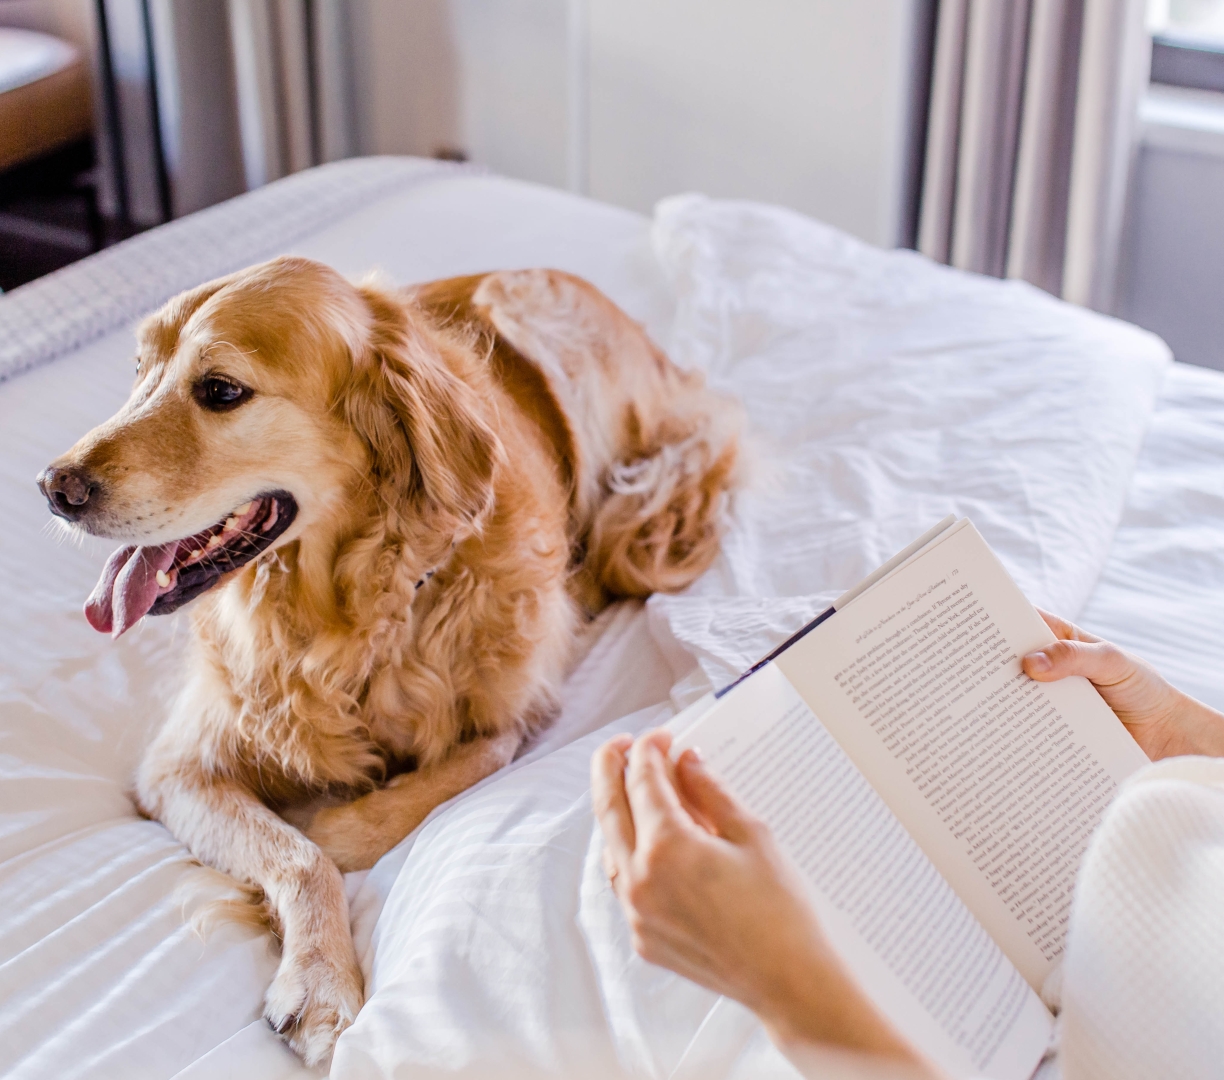 A woman reading in bed with her dog.